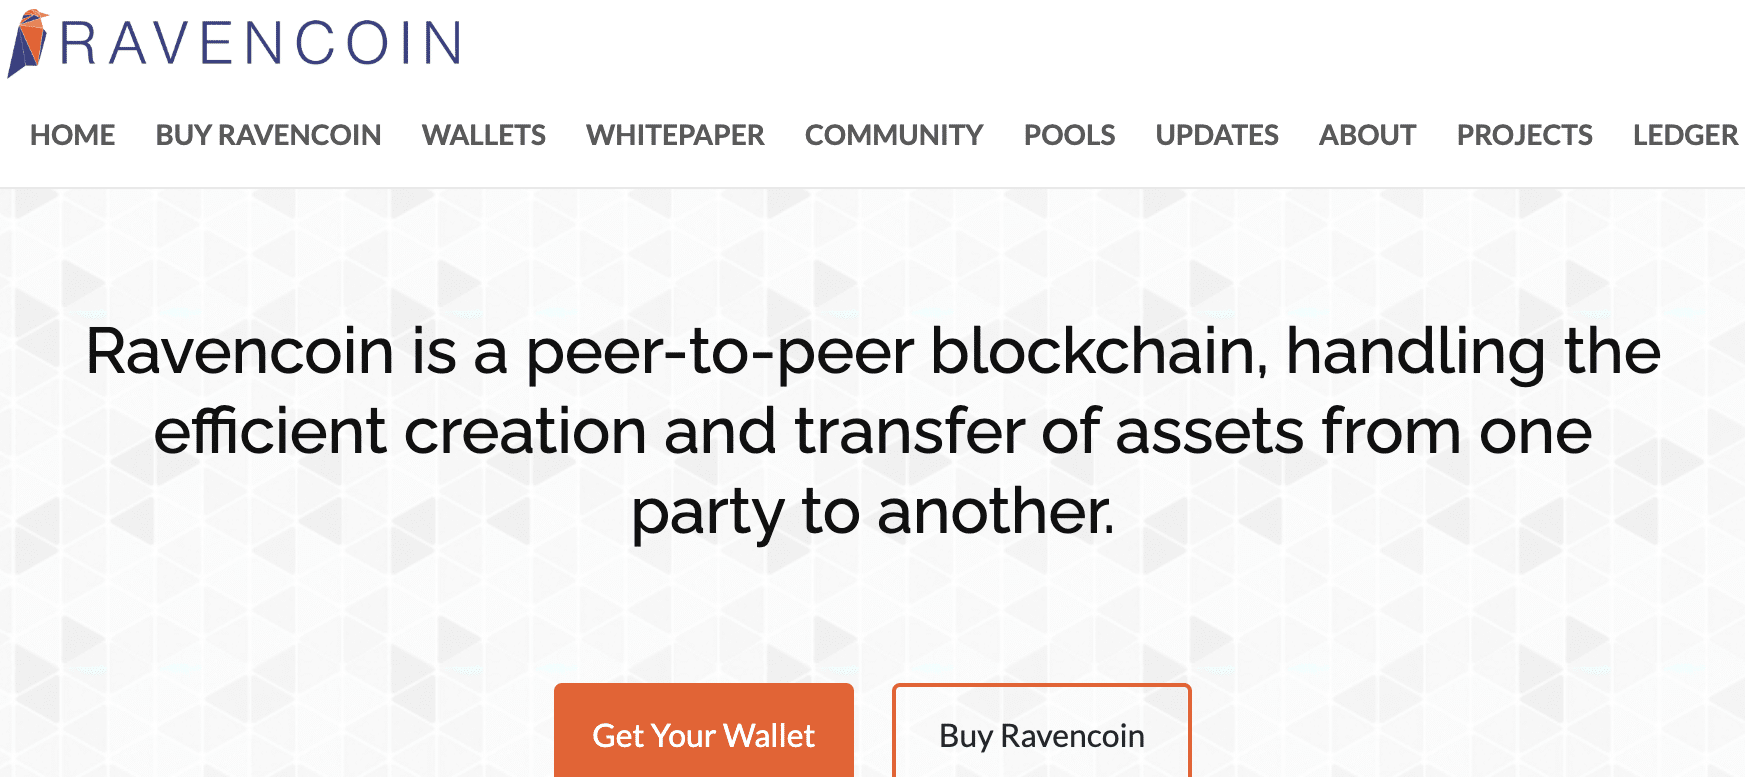 Ravencoin - Specialised P2P Network